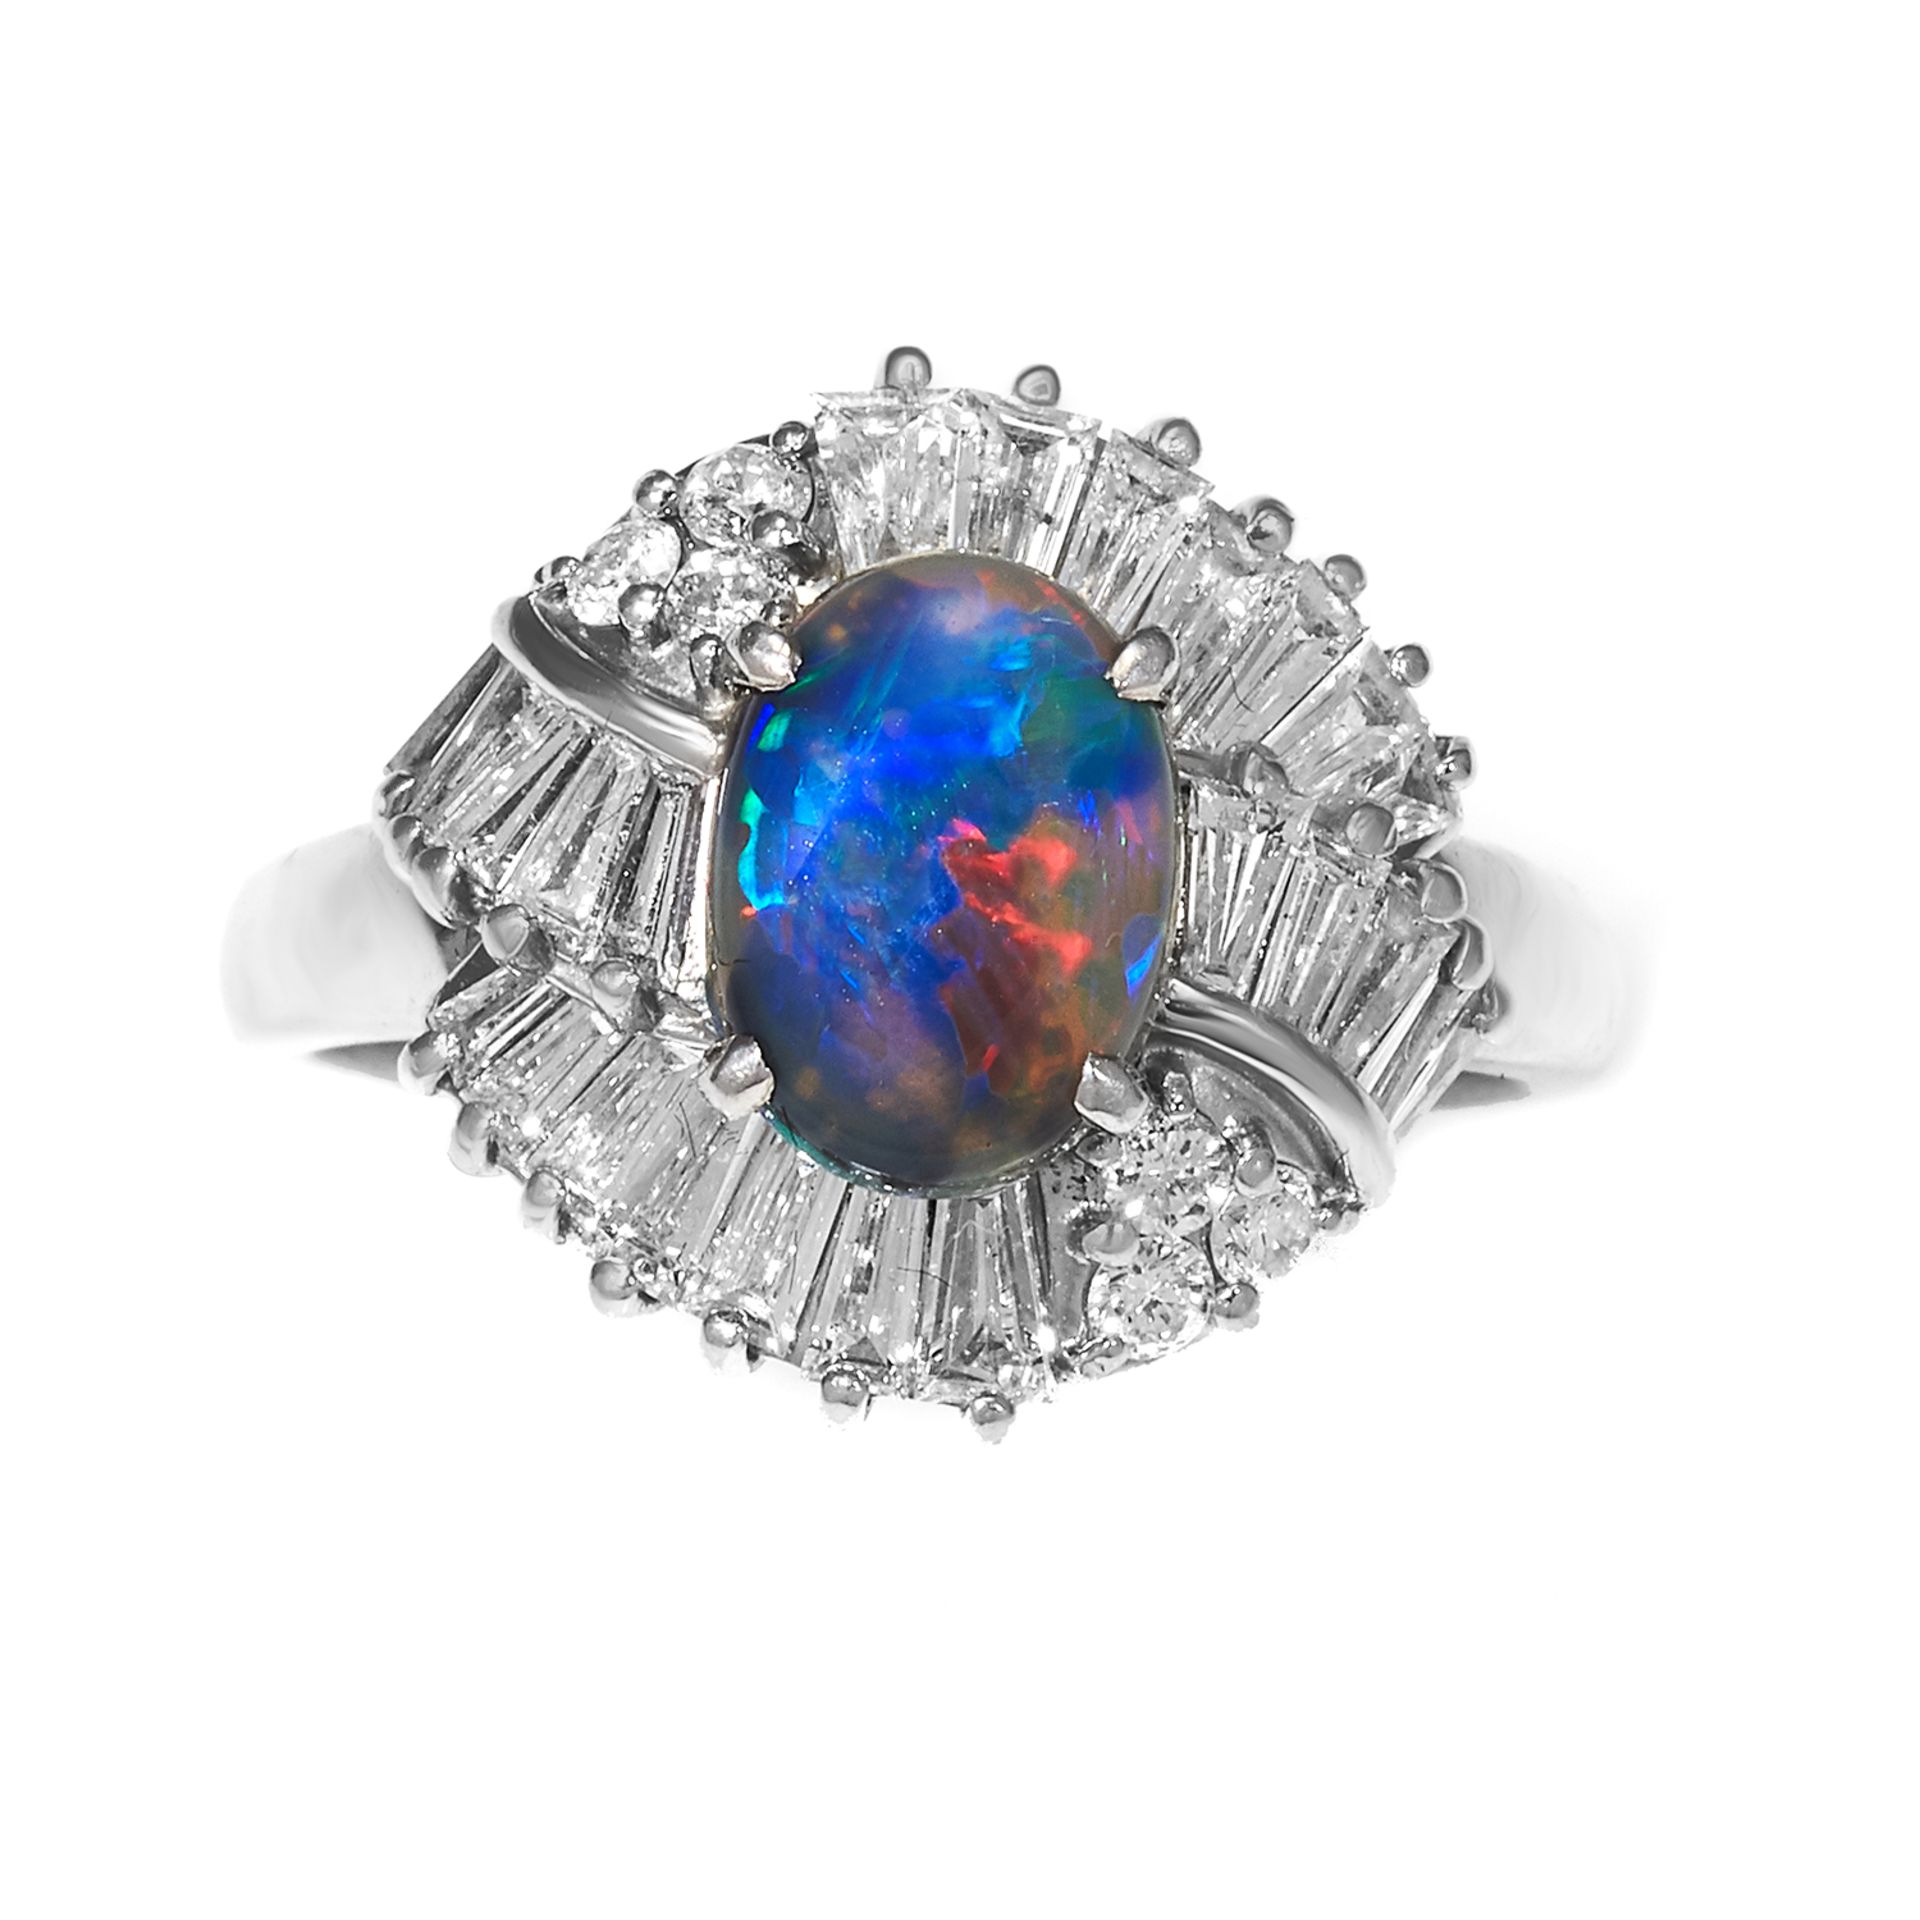 A BLACK OPAL AND DIAMOND CLUSTER DRESS RING in platinum, set with a central black opal of